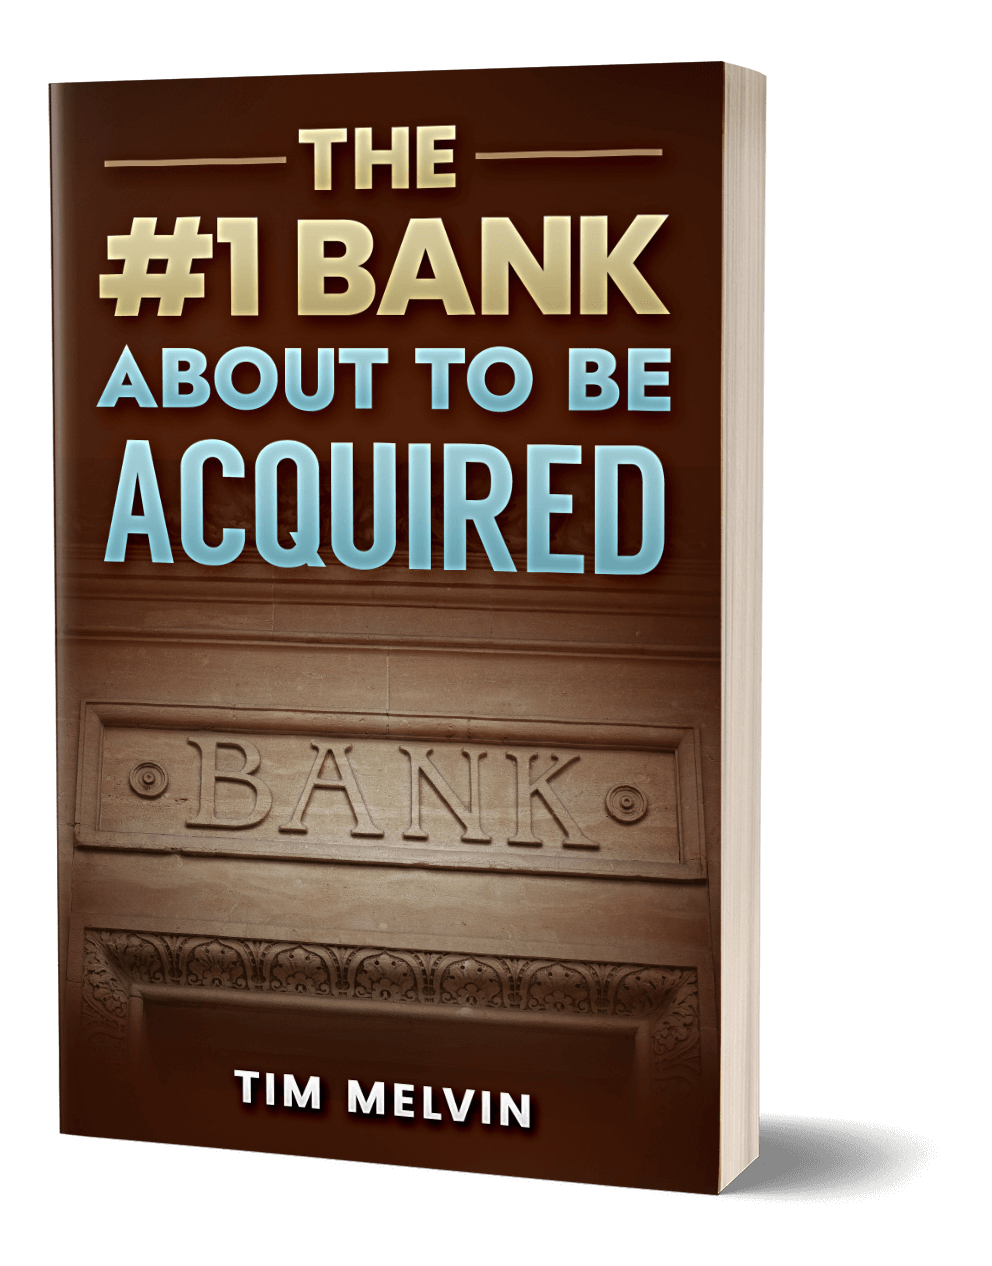 #1 bank to be acquired